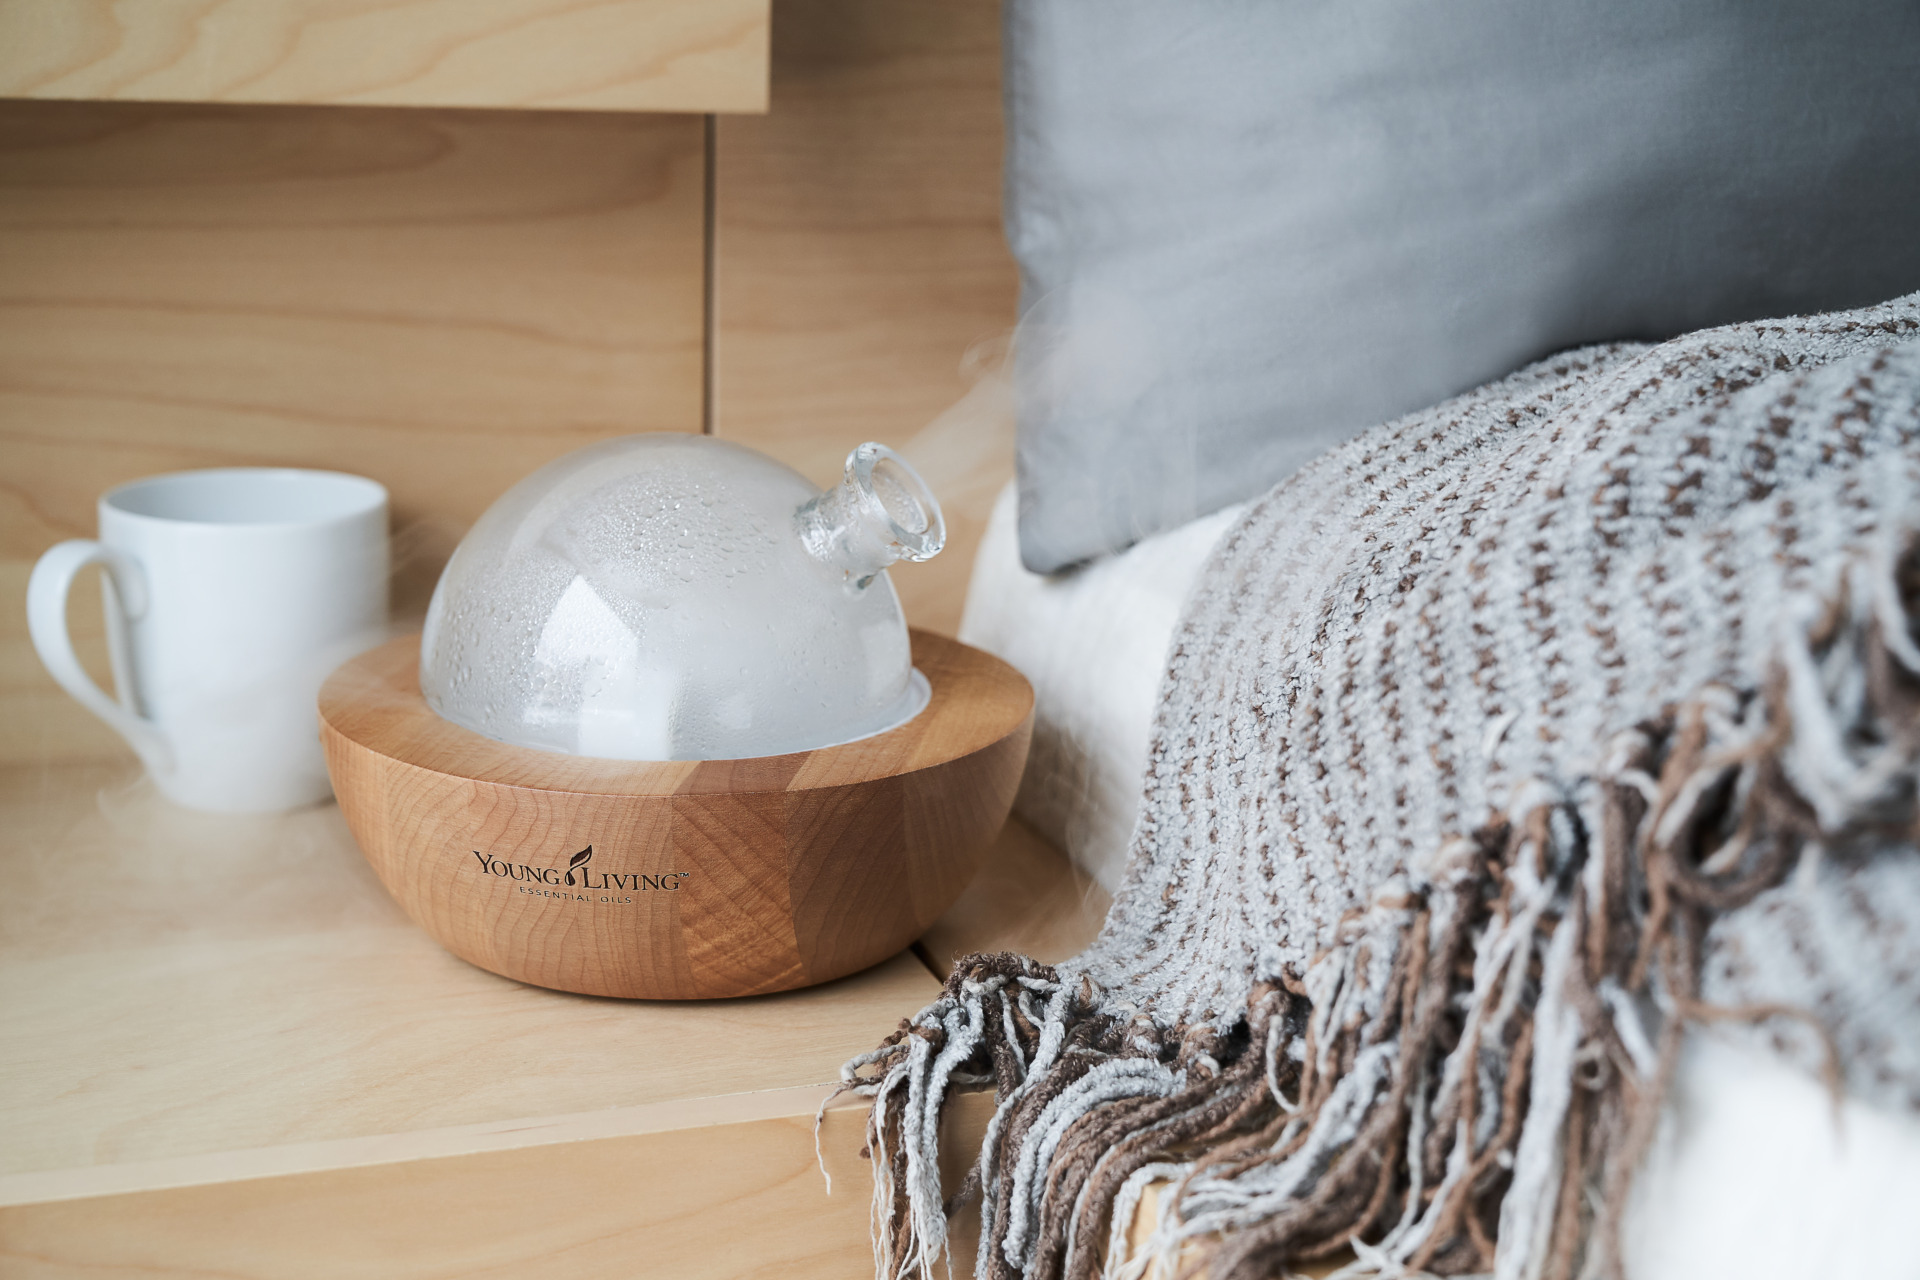 Aria diffuser by a bed